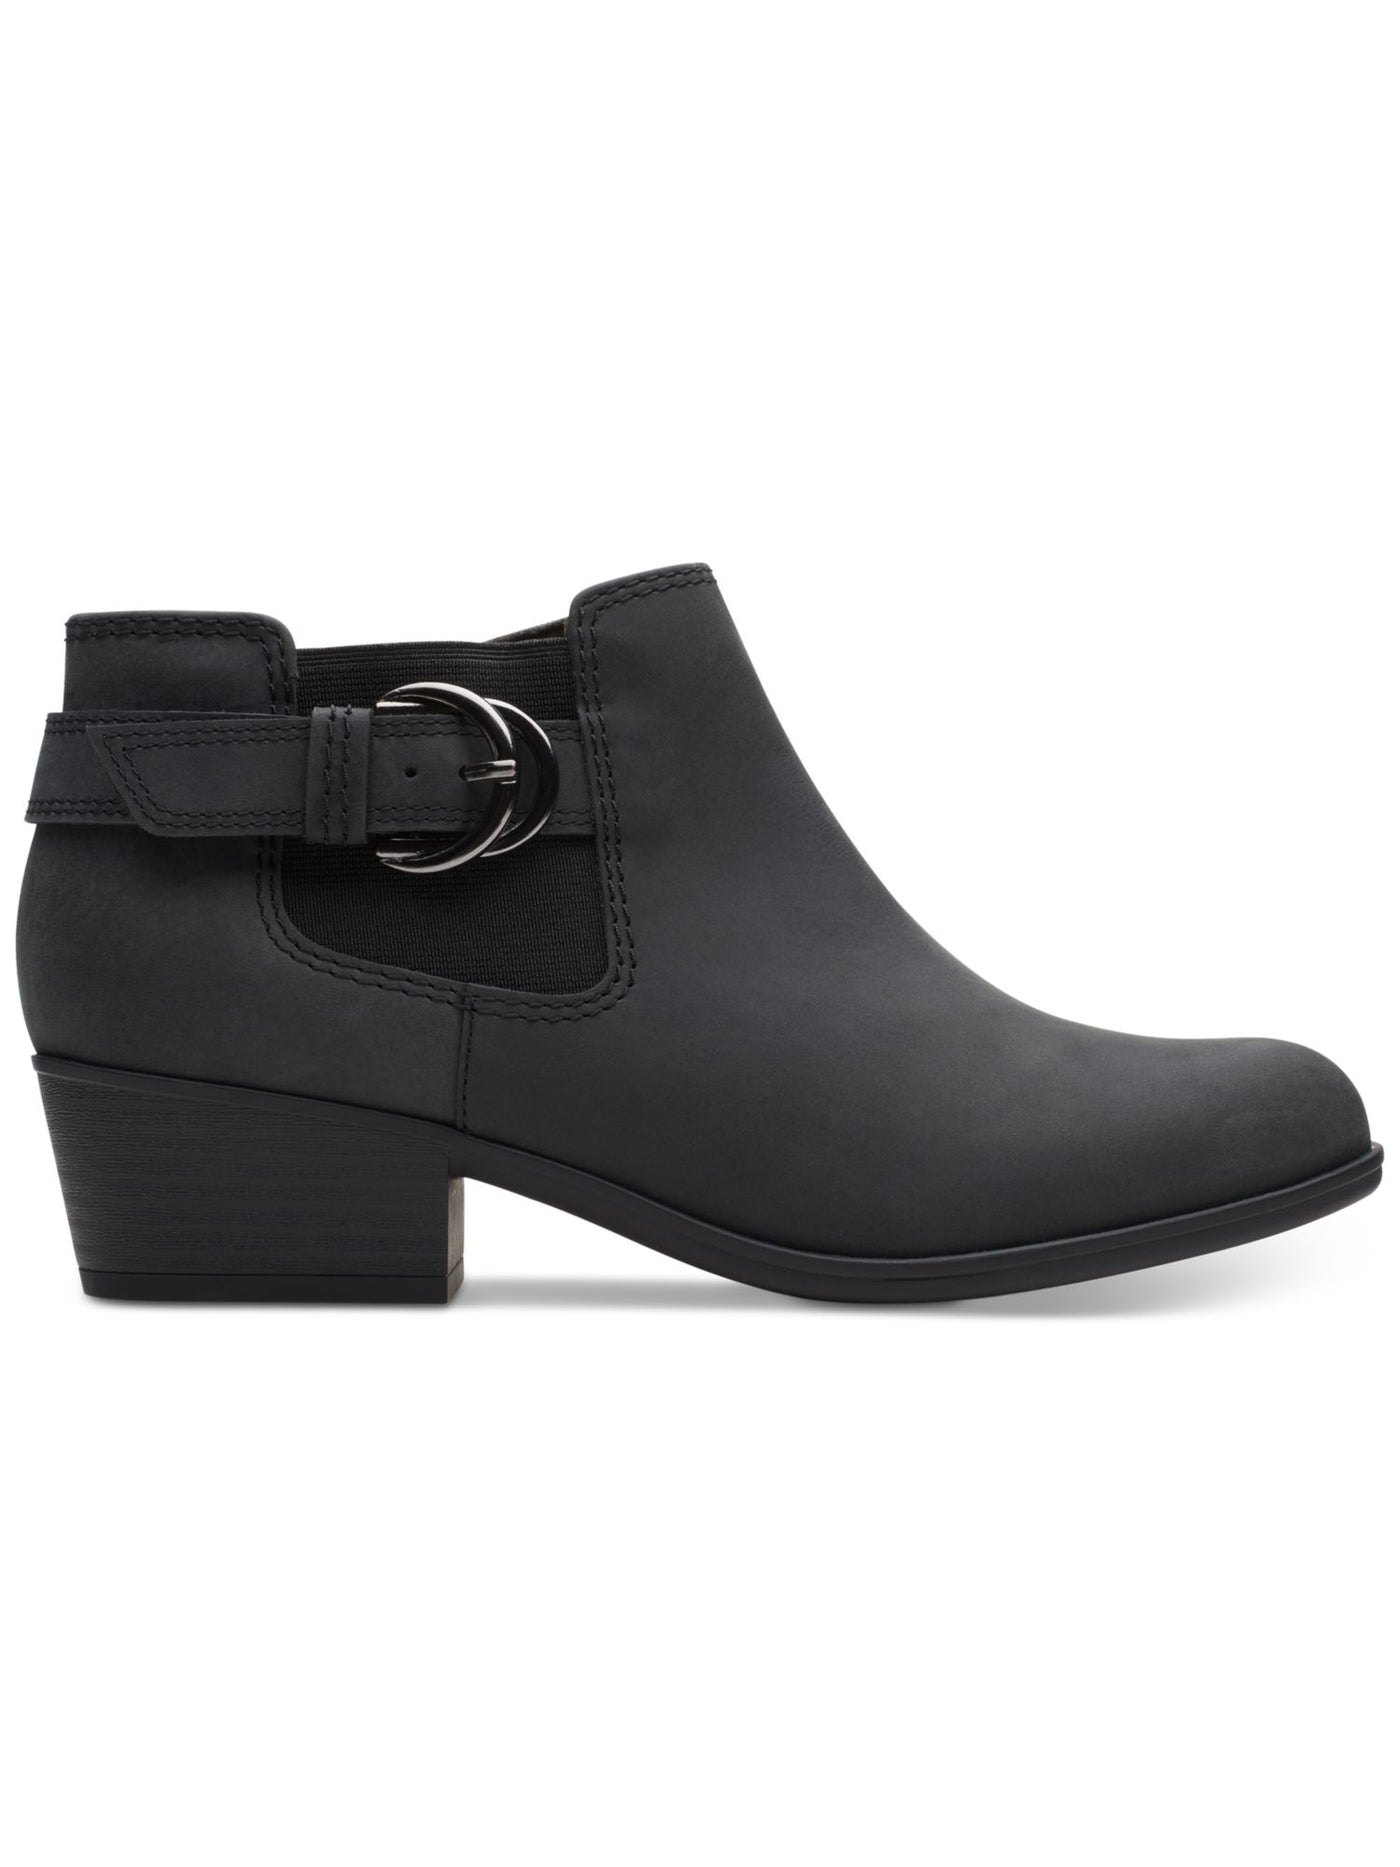 CLARKS COLLECTION Womens Black Cushioned Buckle Accent Adreena Round Toe Block Heel Zip-Up Leather Booties 11 M